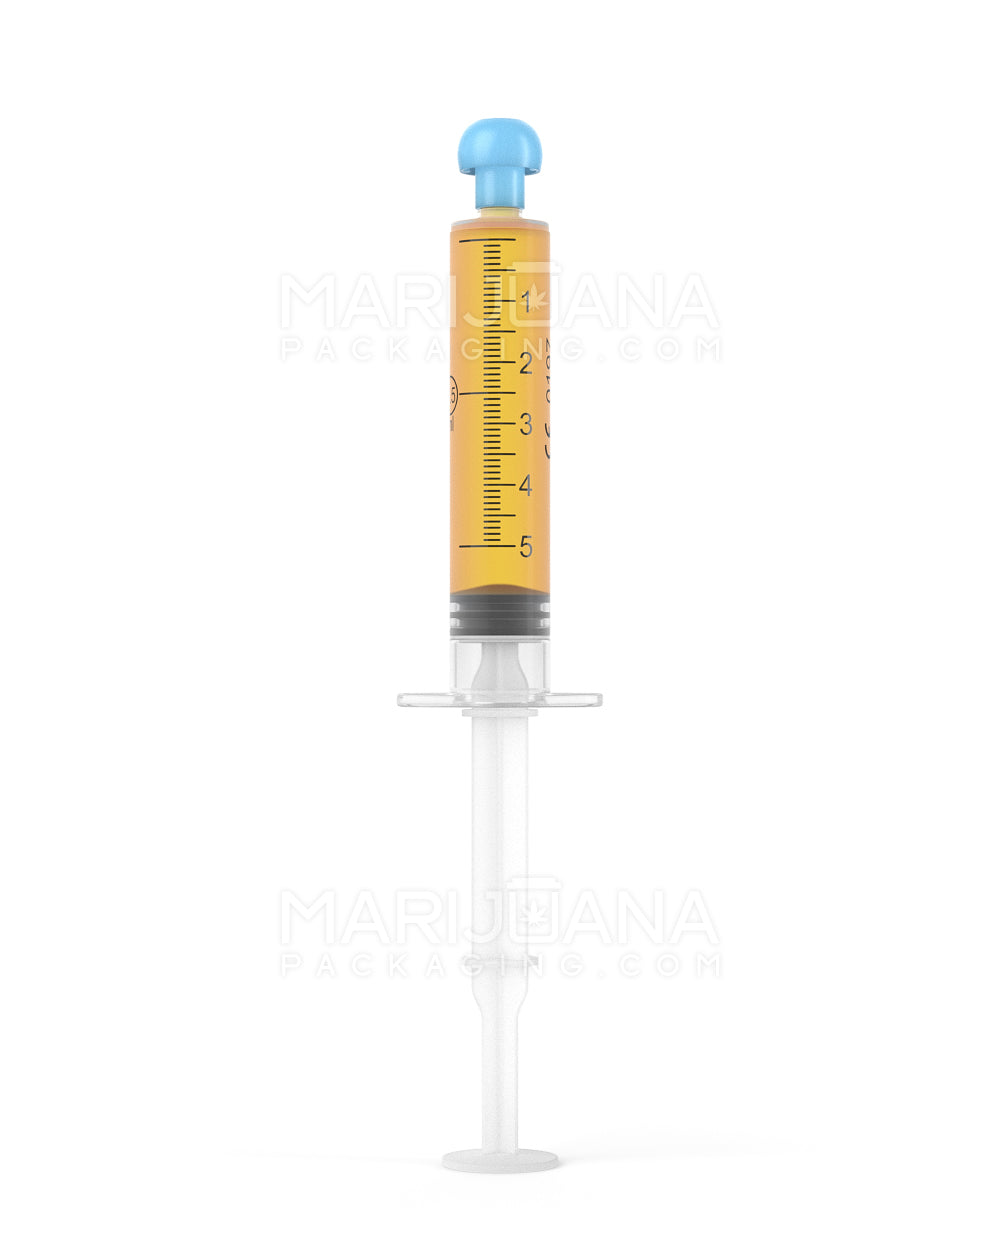 Plastic Oral Concentrate Syringes | 5mL - 1mL Increments | Sample - 2